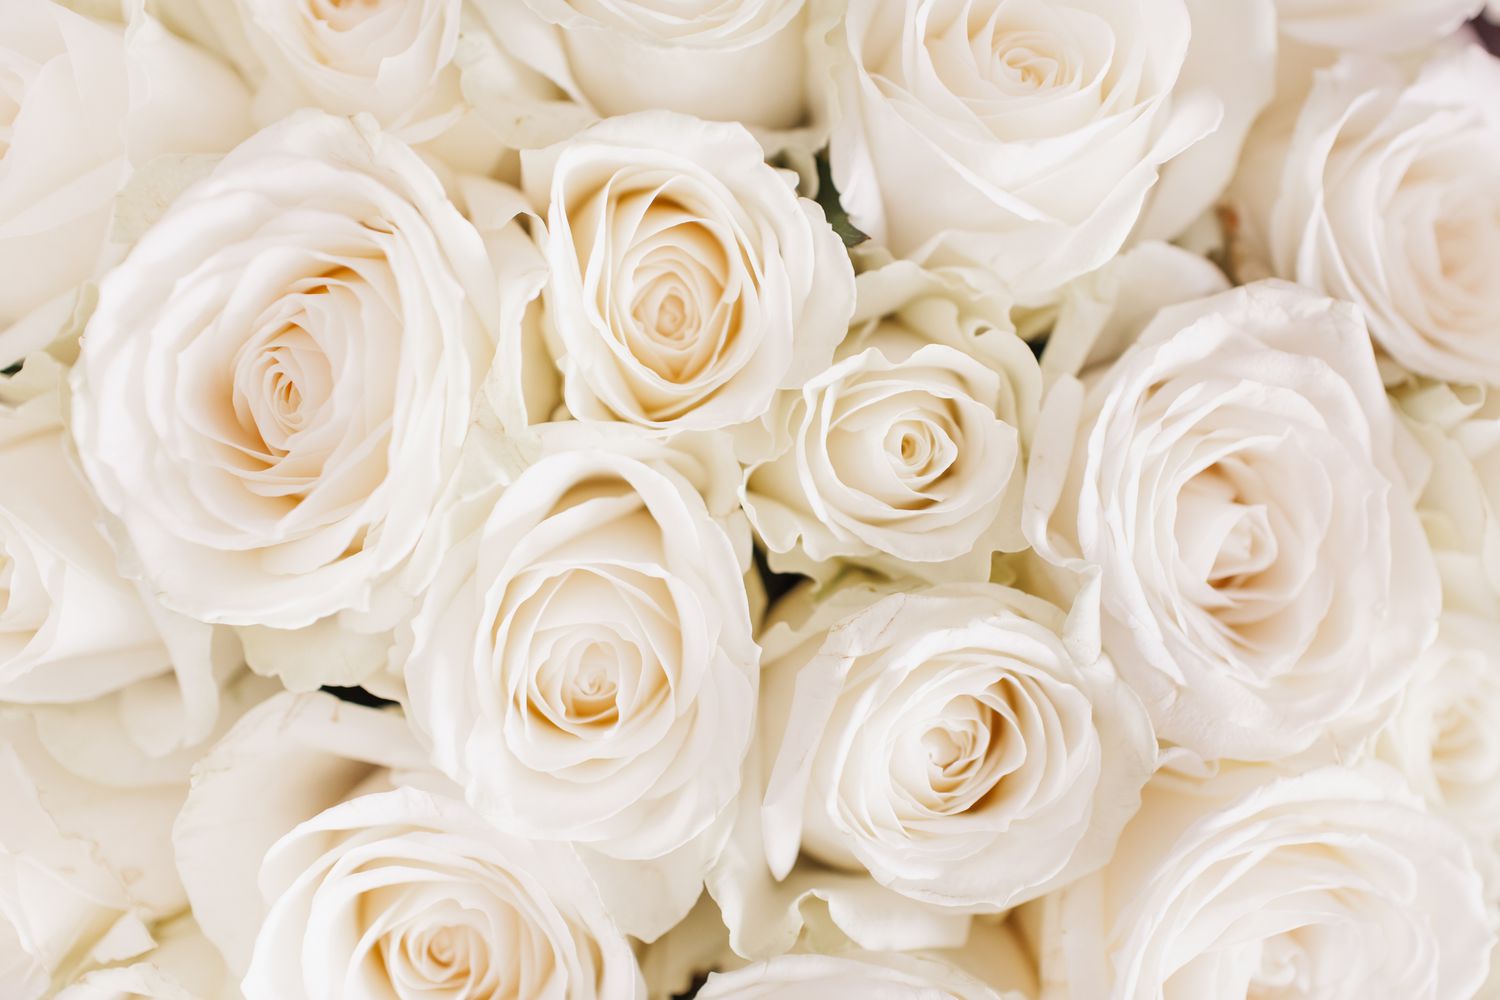 significance of white roses